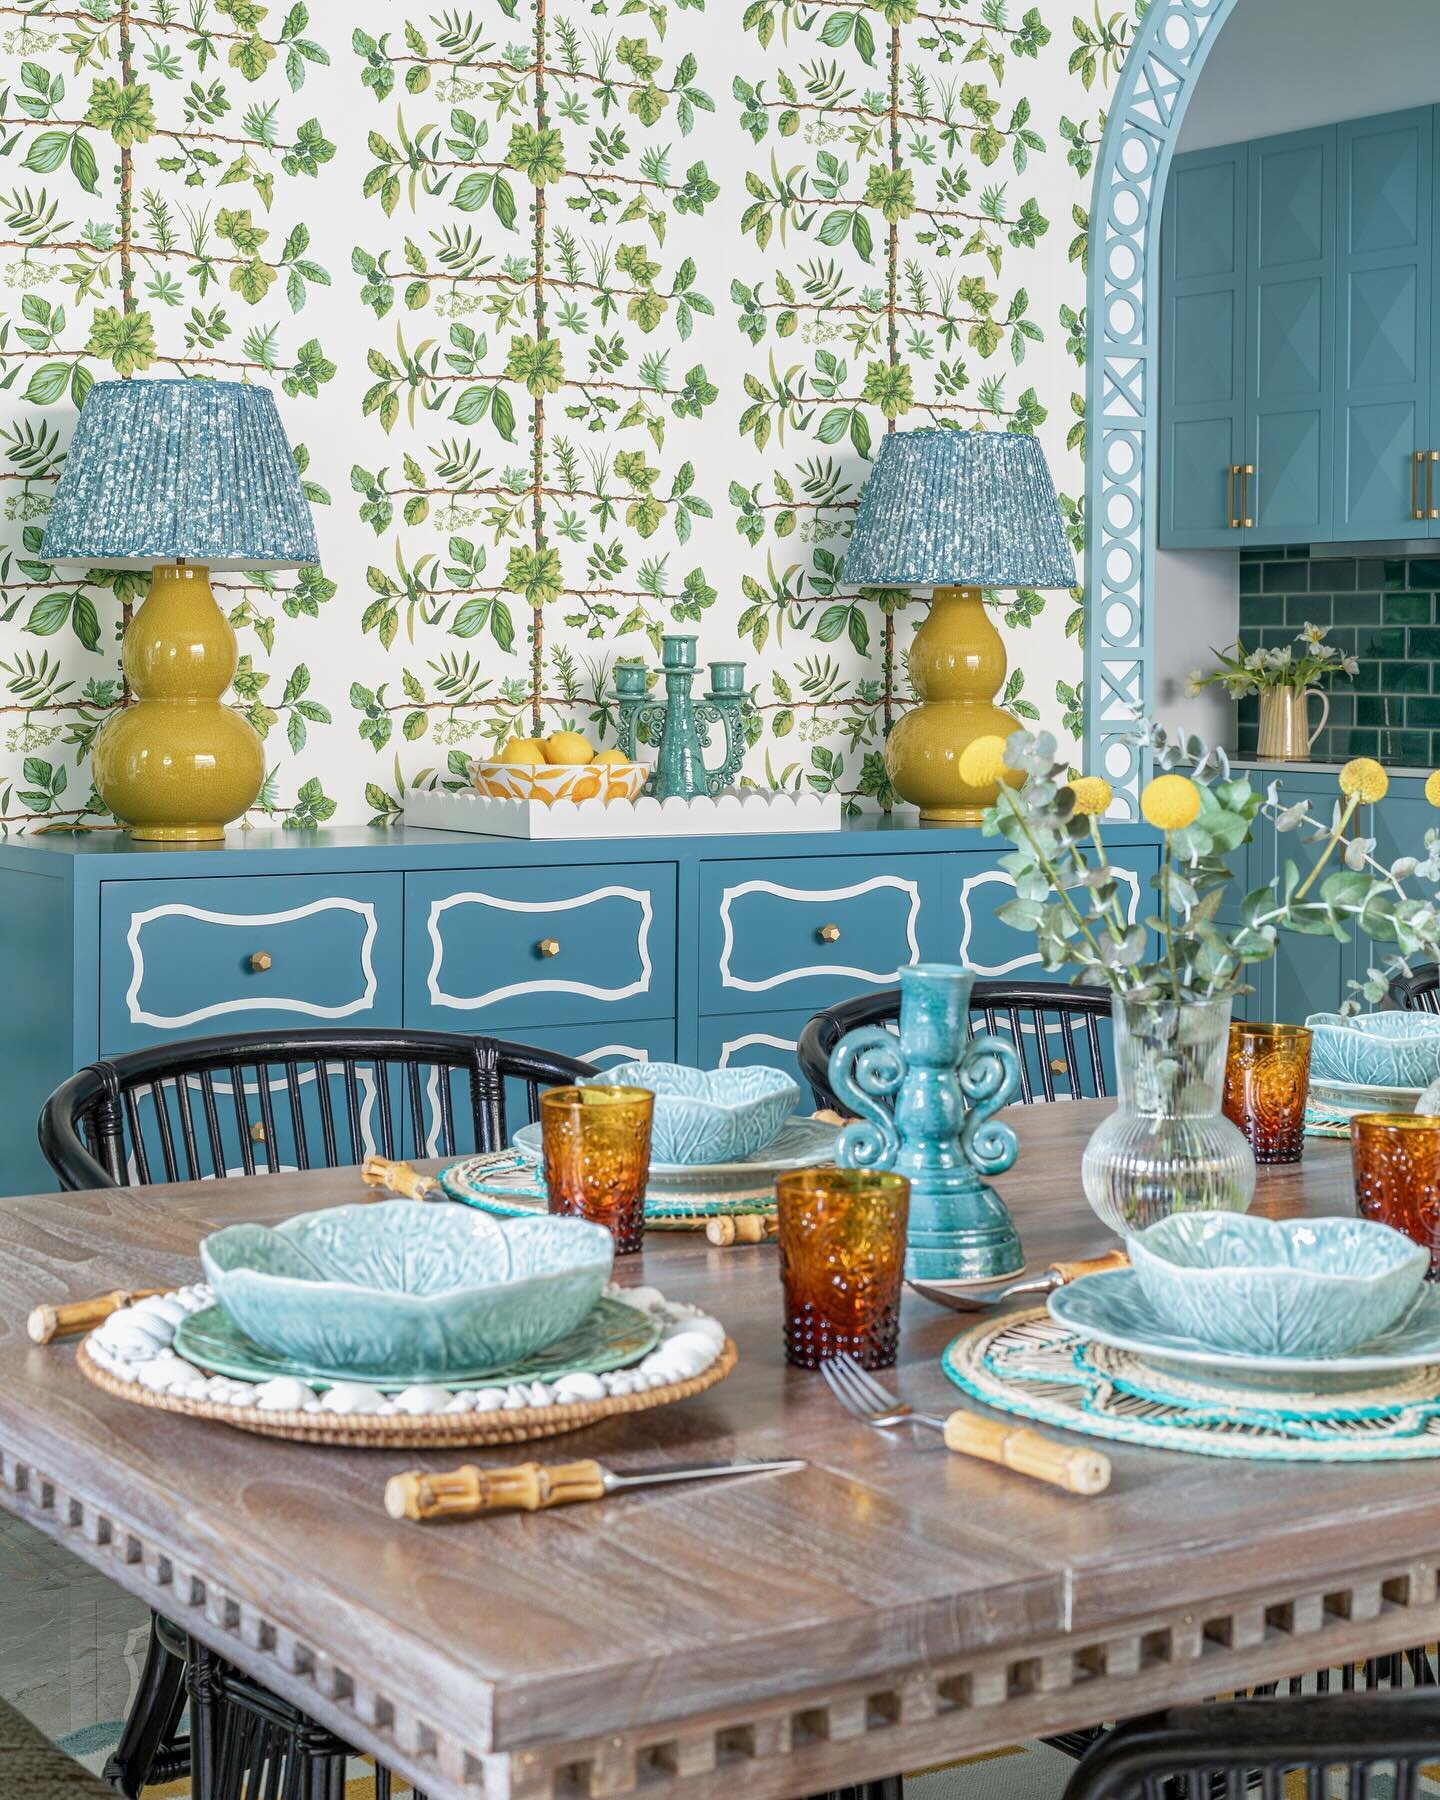 HAPPY EASTER MONDAY ✨🐰✨ Springing into a new month with this fresh and happy dining room we recently designed that sets the scene for a joyous Spring celebration 💙🌼💚

📸 @mo_arpi_studio 

#interiordesign #interiordesignsingapore #diningroom #spri